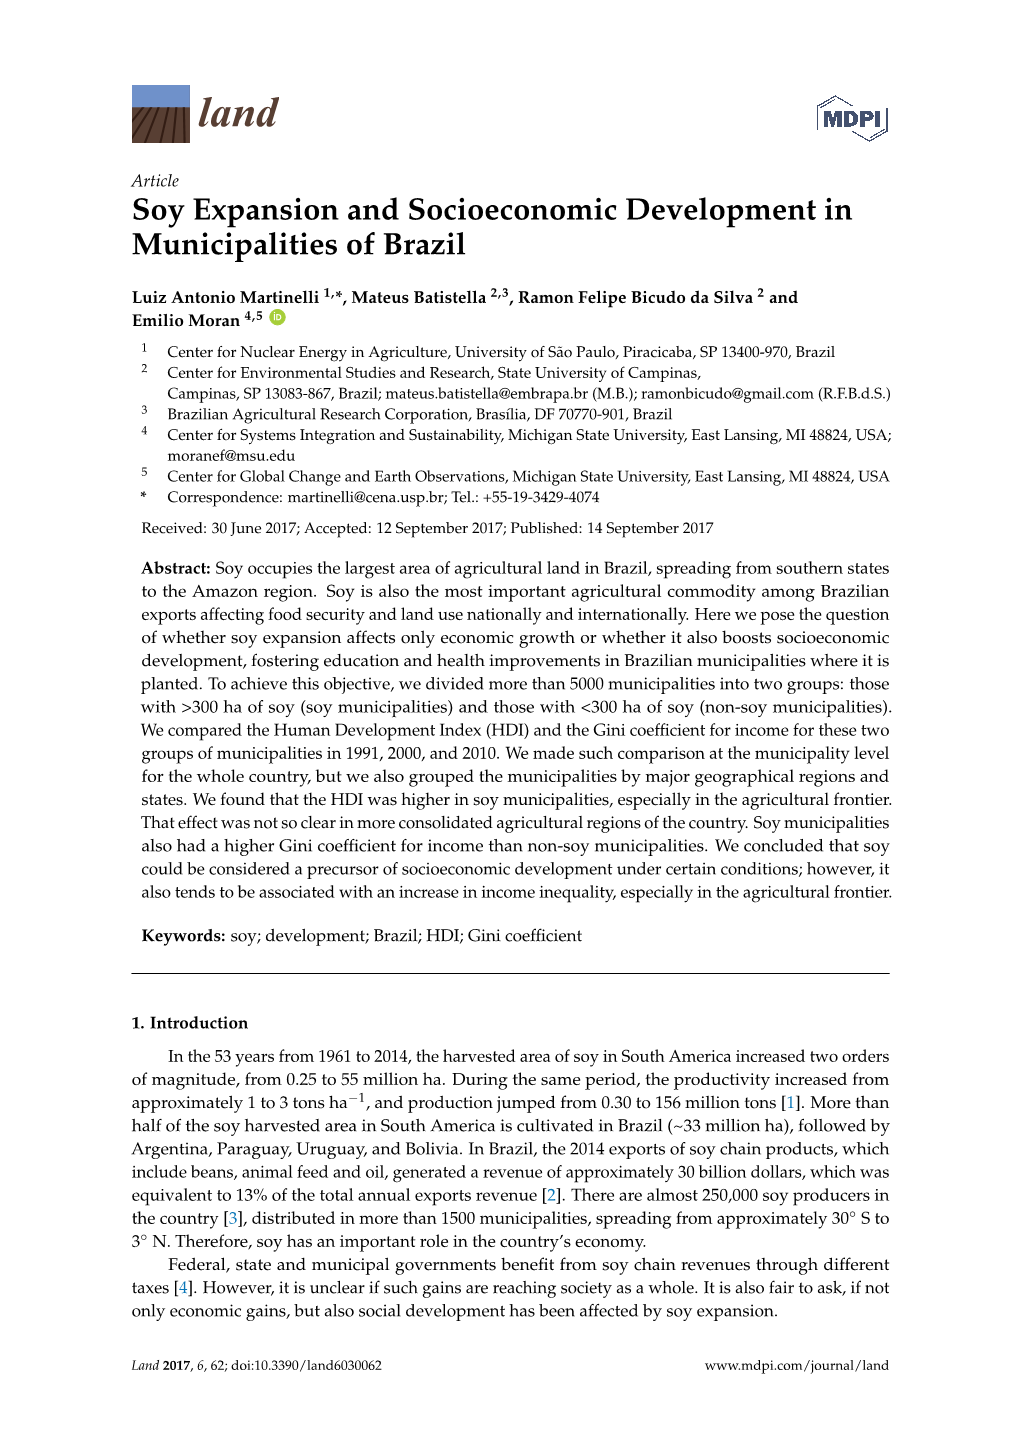 Soy Expansion and Socioeconomic Development in Municipalities of Brazil